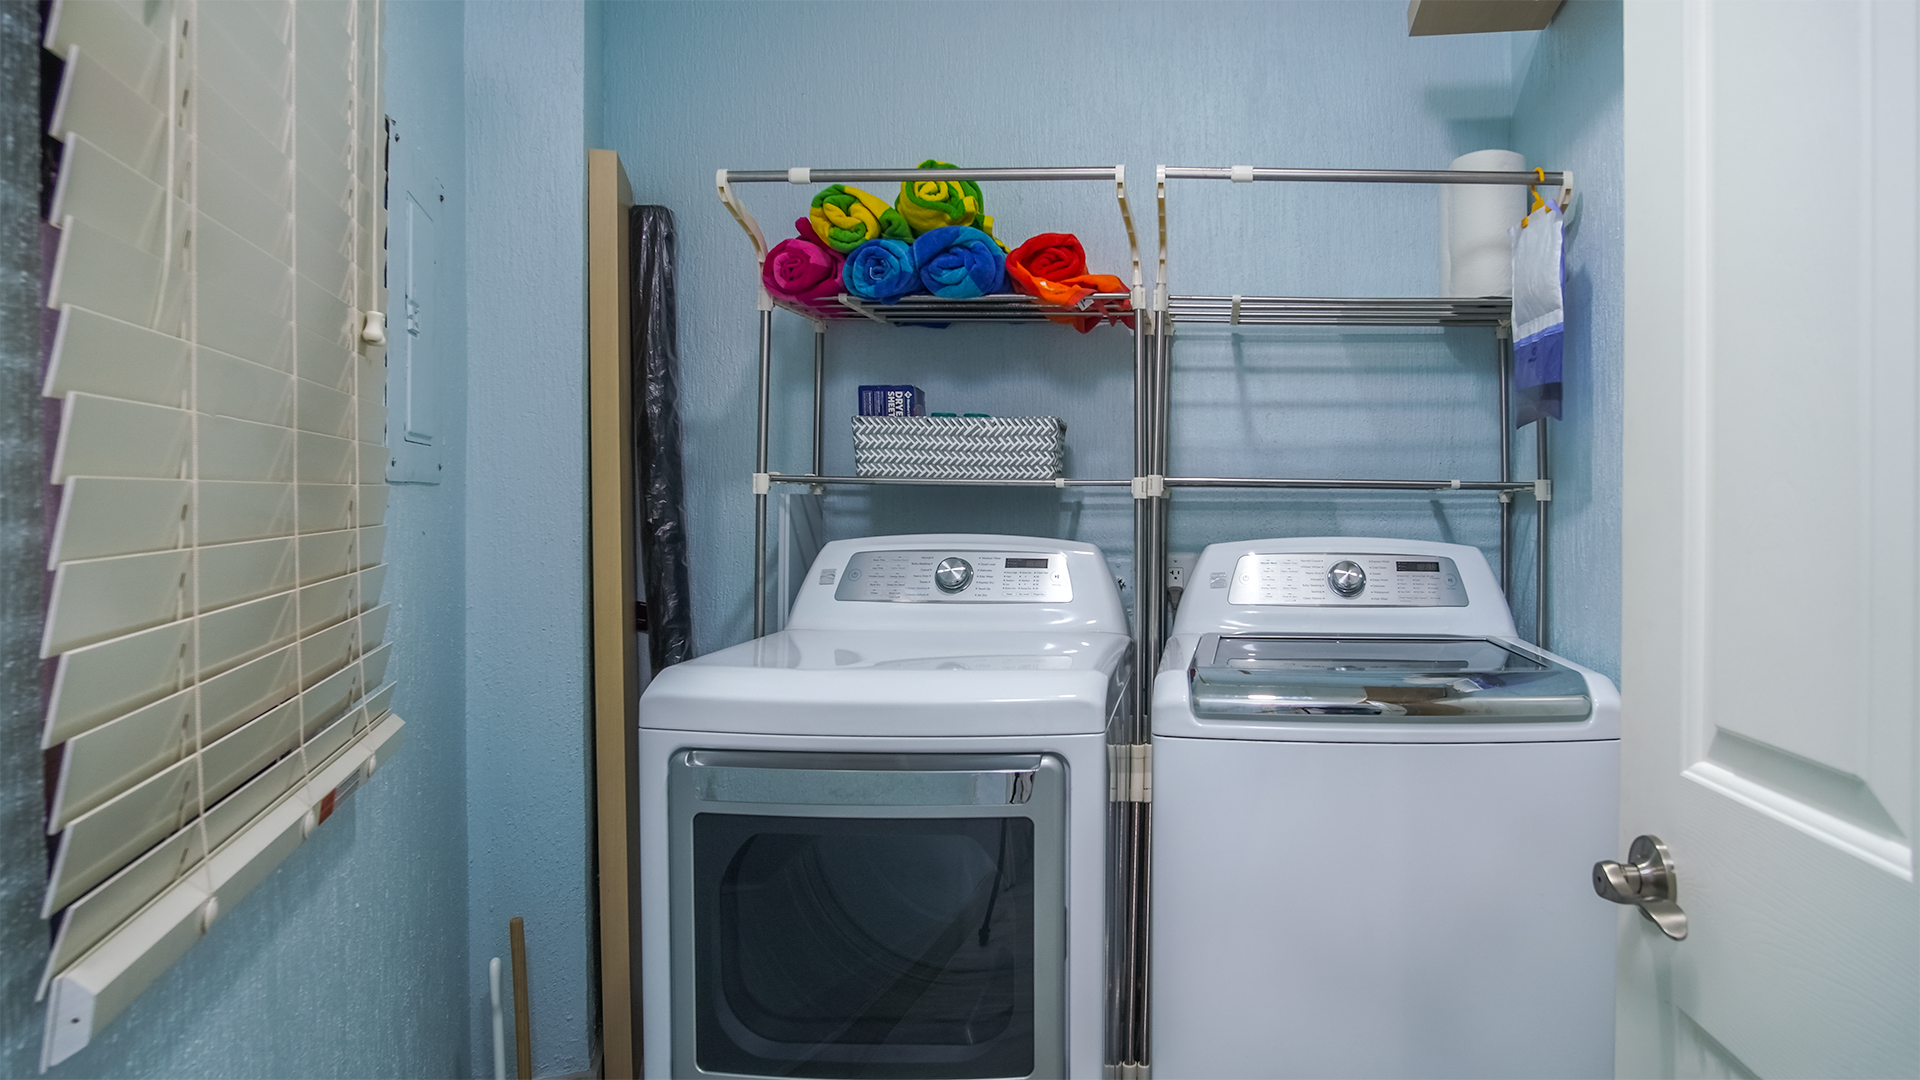 Washer and dryer in the utility room.